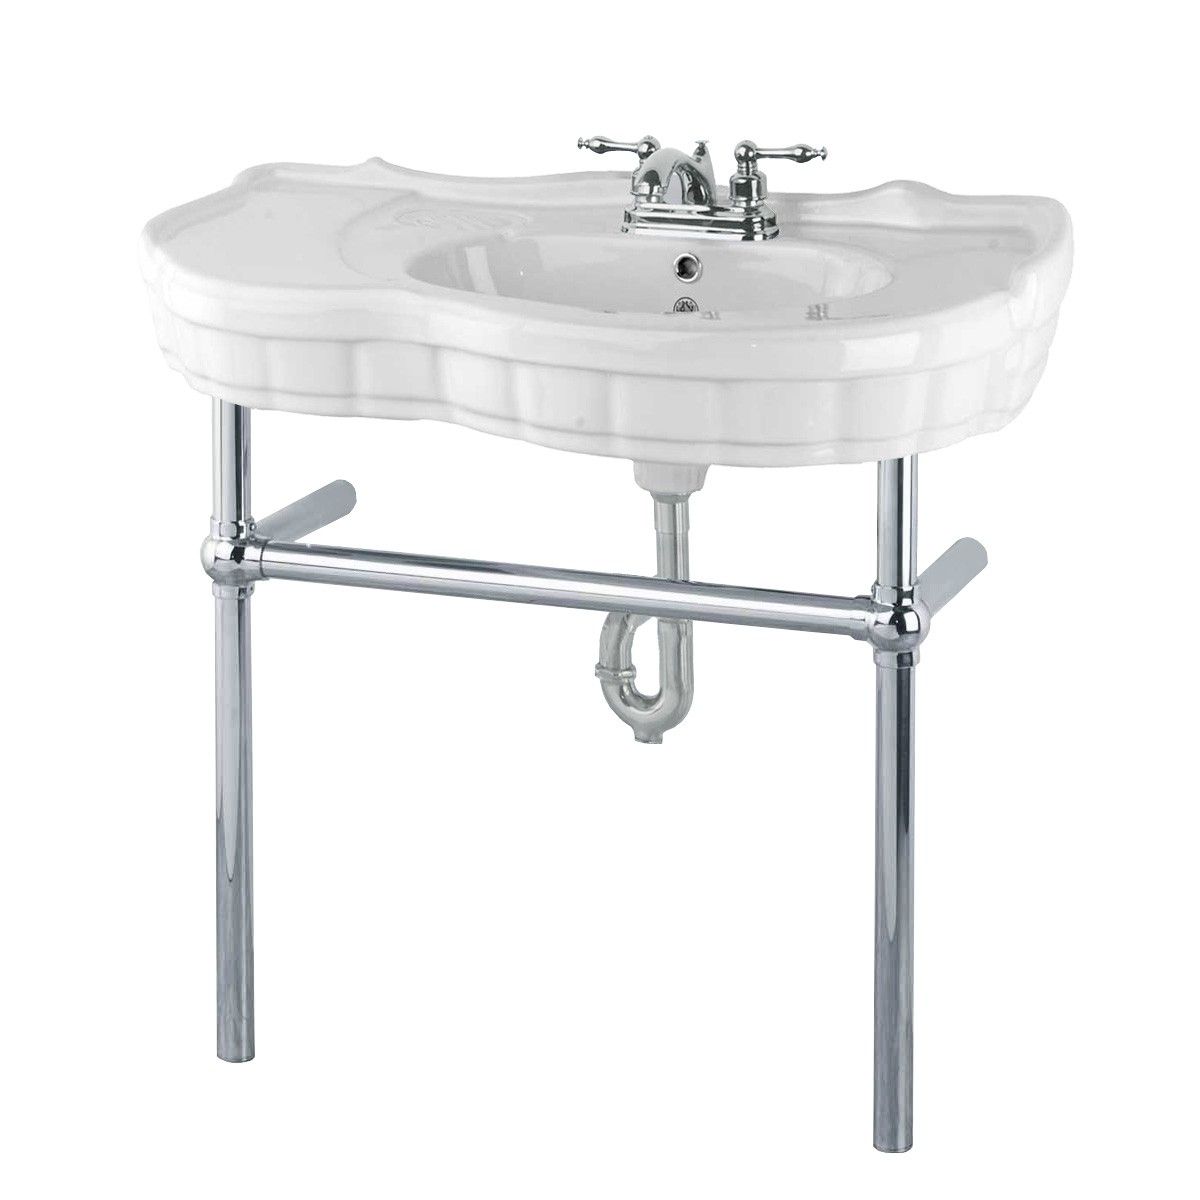 Most Recent White Console Sink Porcelain Southern Belle With Chrome Bistro Legs In White Porcelain And Chrome Wall Mirrors (View 13 of 15)